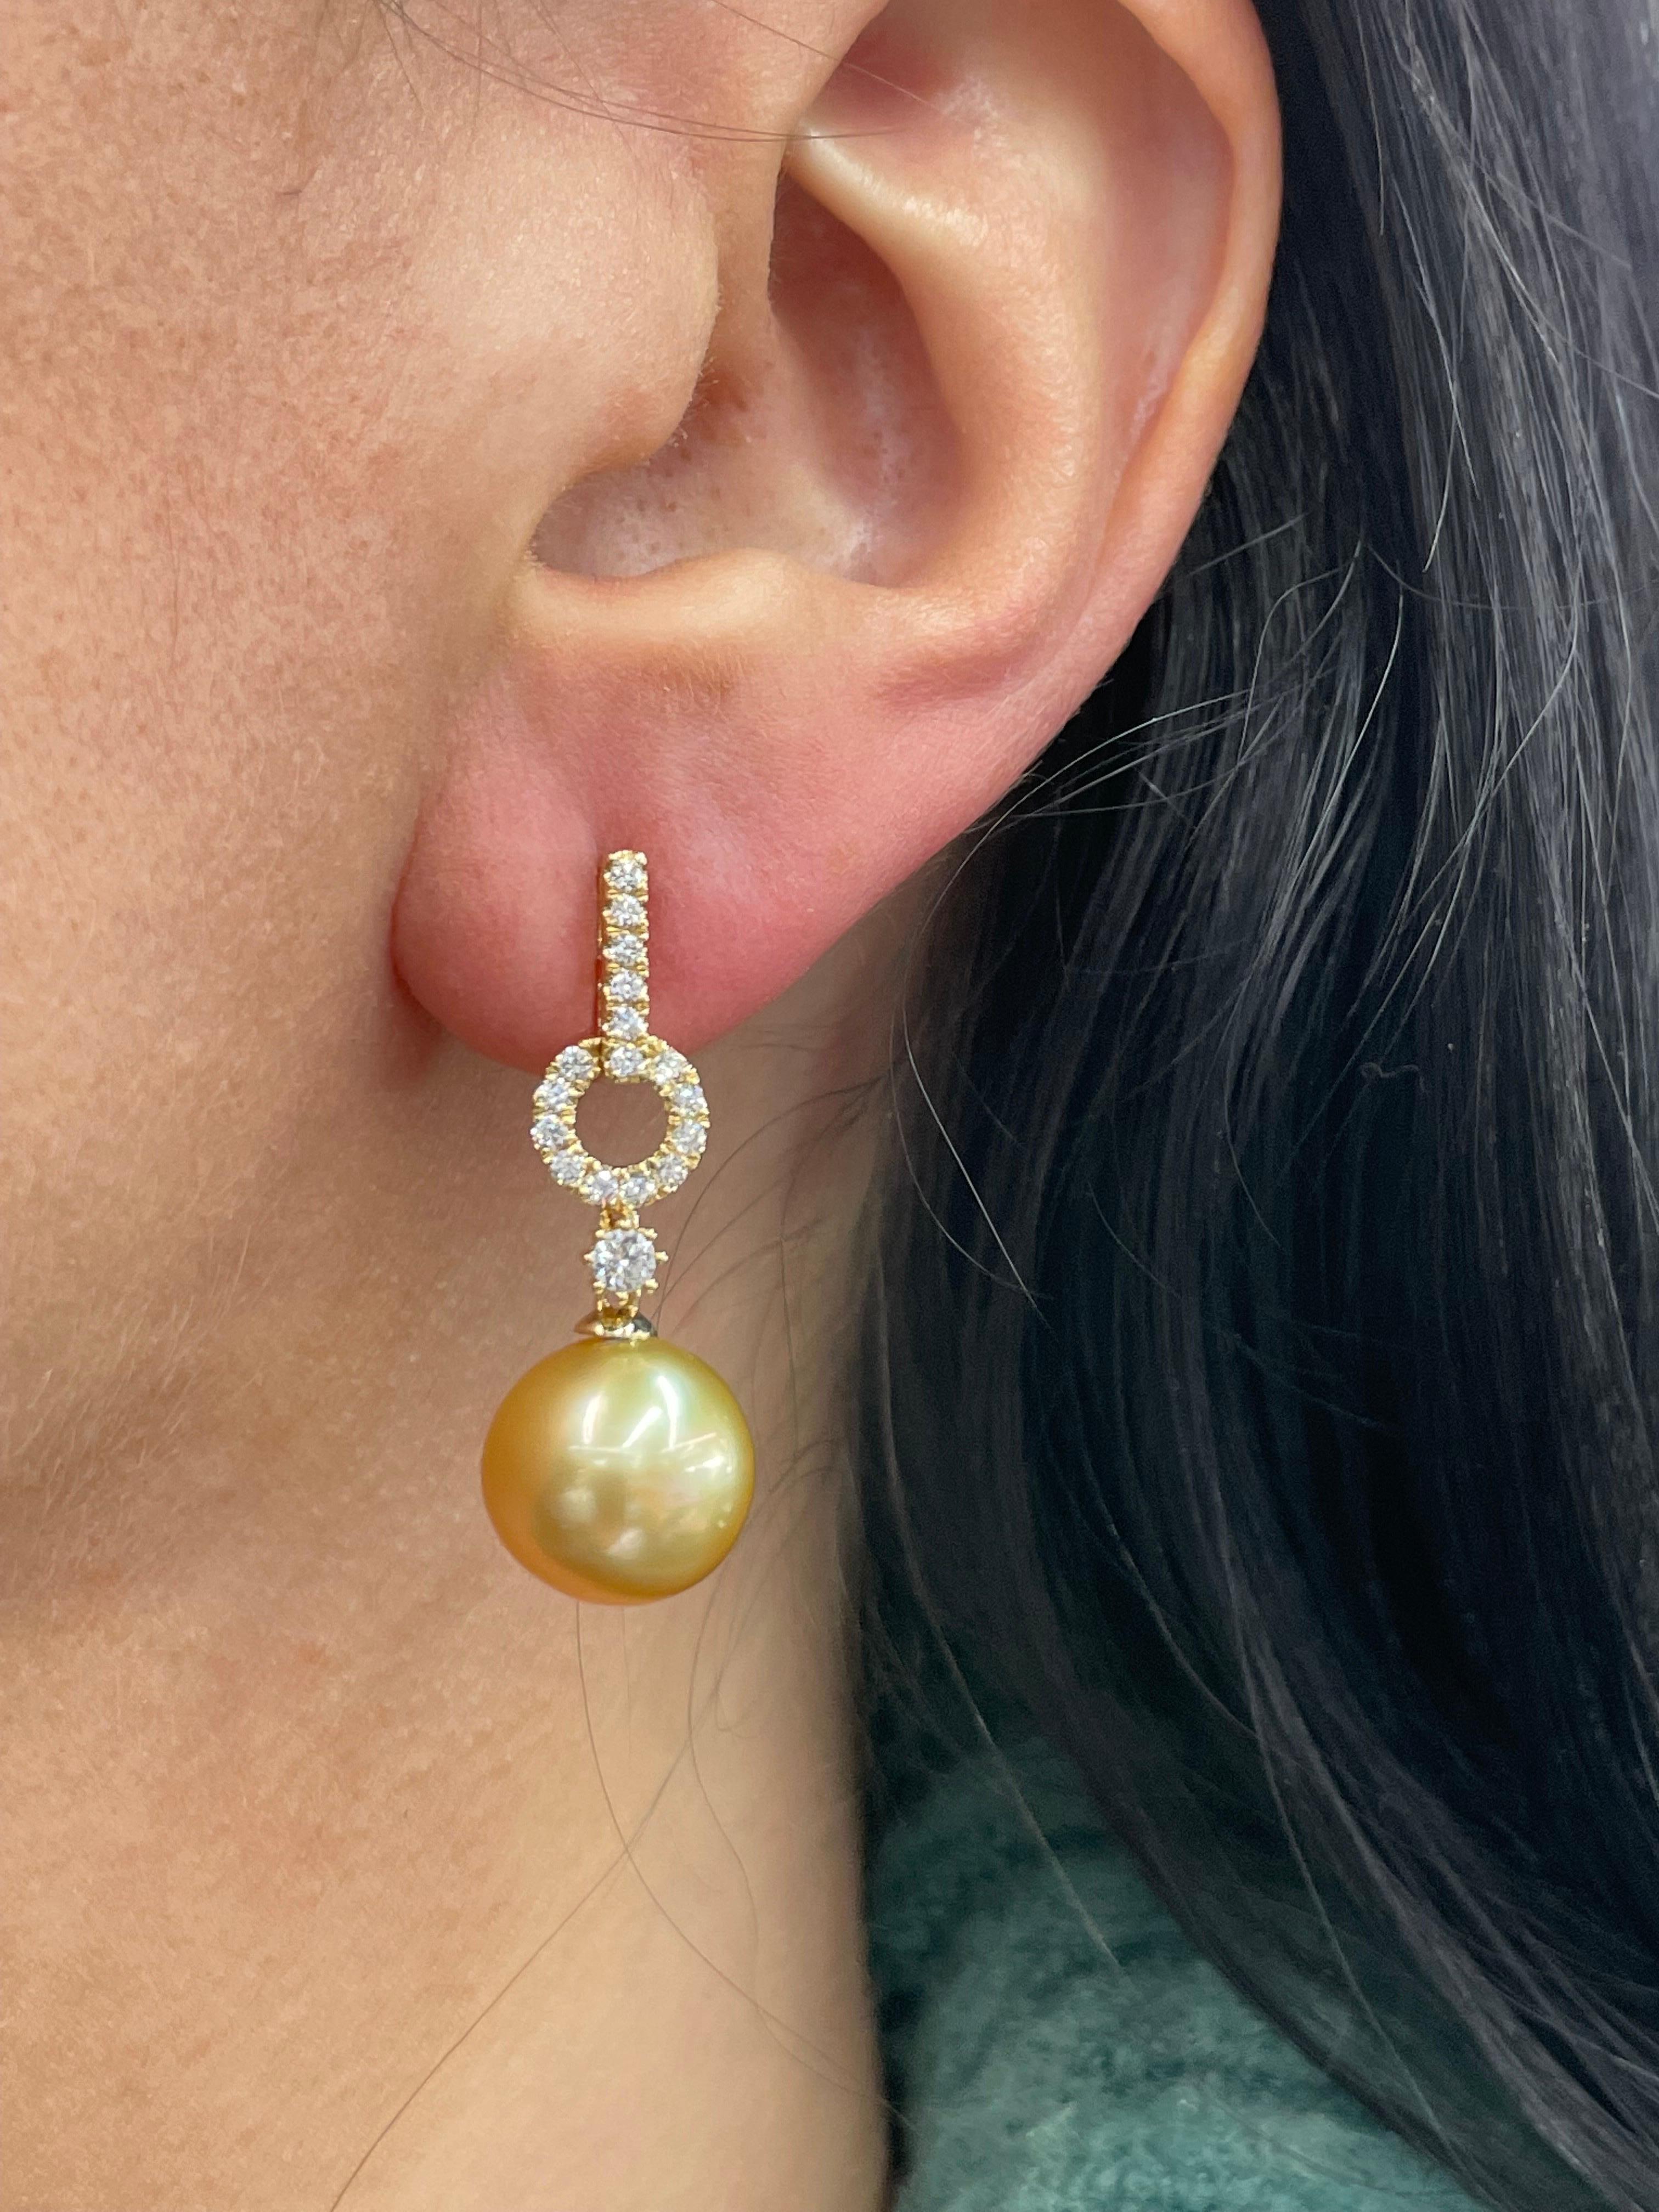 18 Karat Yellow Gold drop earrings featuring 34 round brilliants weighing 0.61 Carats with two Golden South Sea Pearls measuring 11-12 MM.
Can customize Pearl color & size.
DM for more information. 